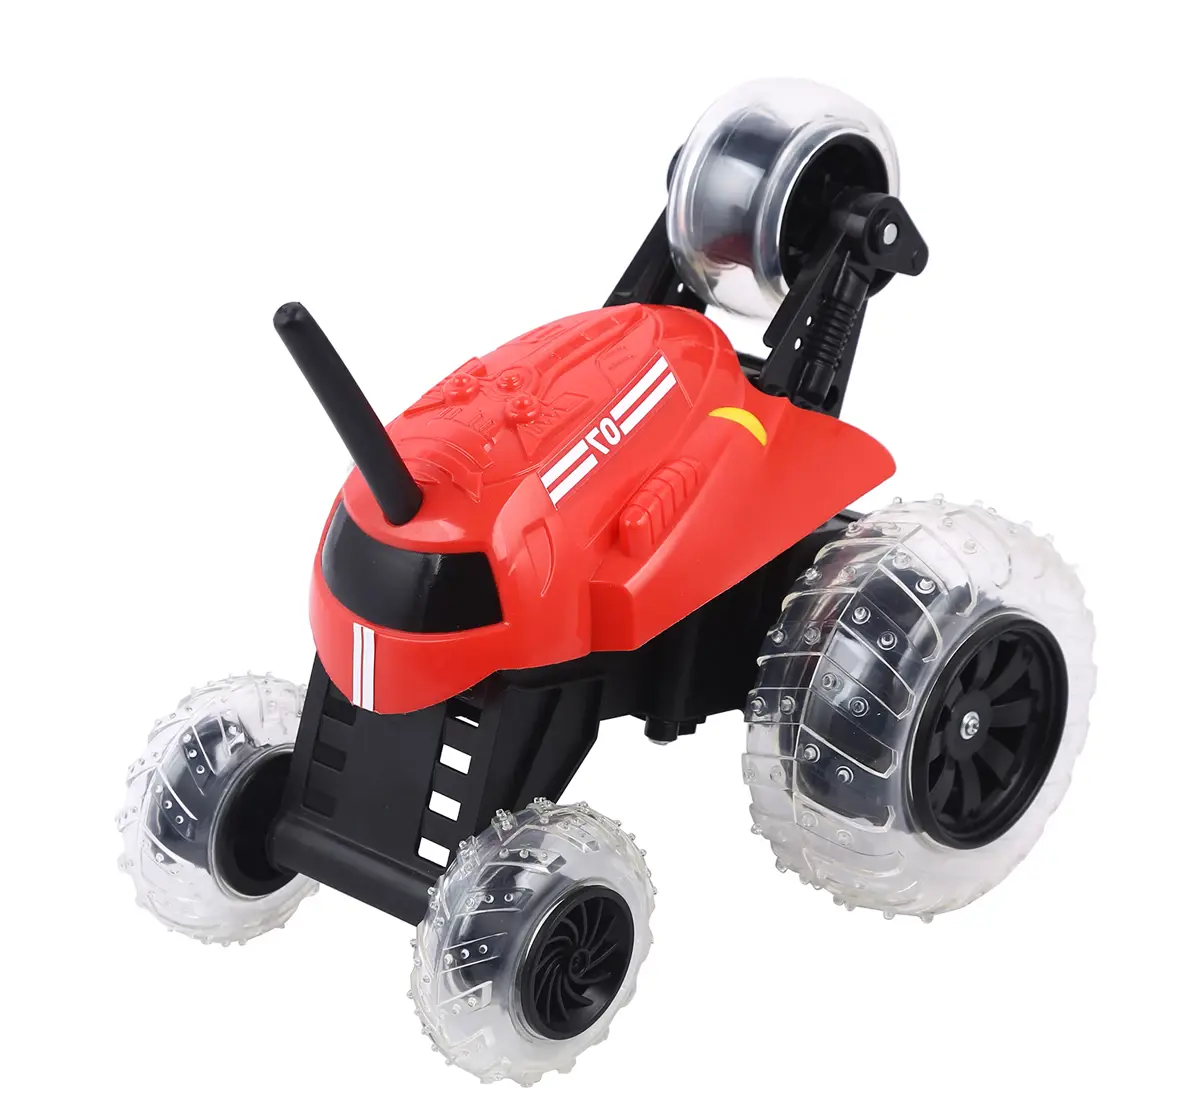 Thunder Tumbler Spinning Stunt Remote Controlled Car by Sharper Image, For Kids 6 Years and Above, Red